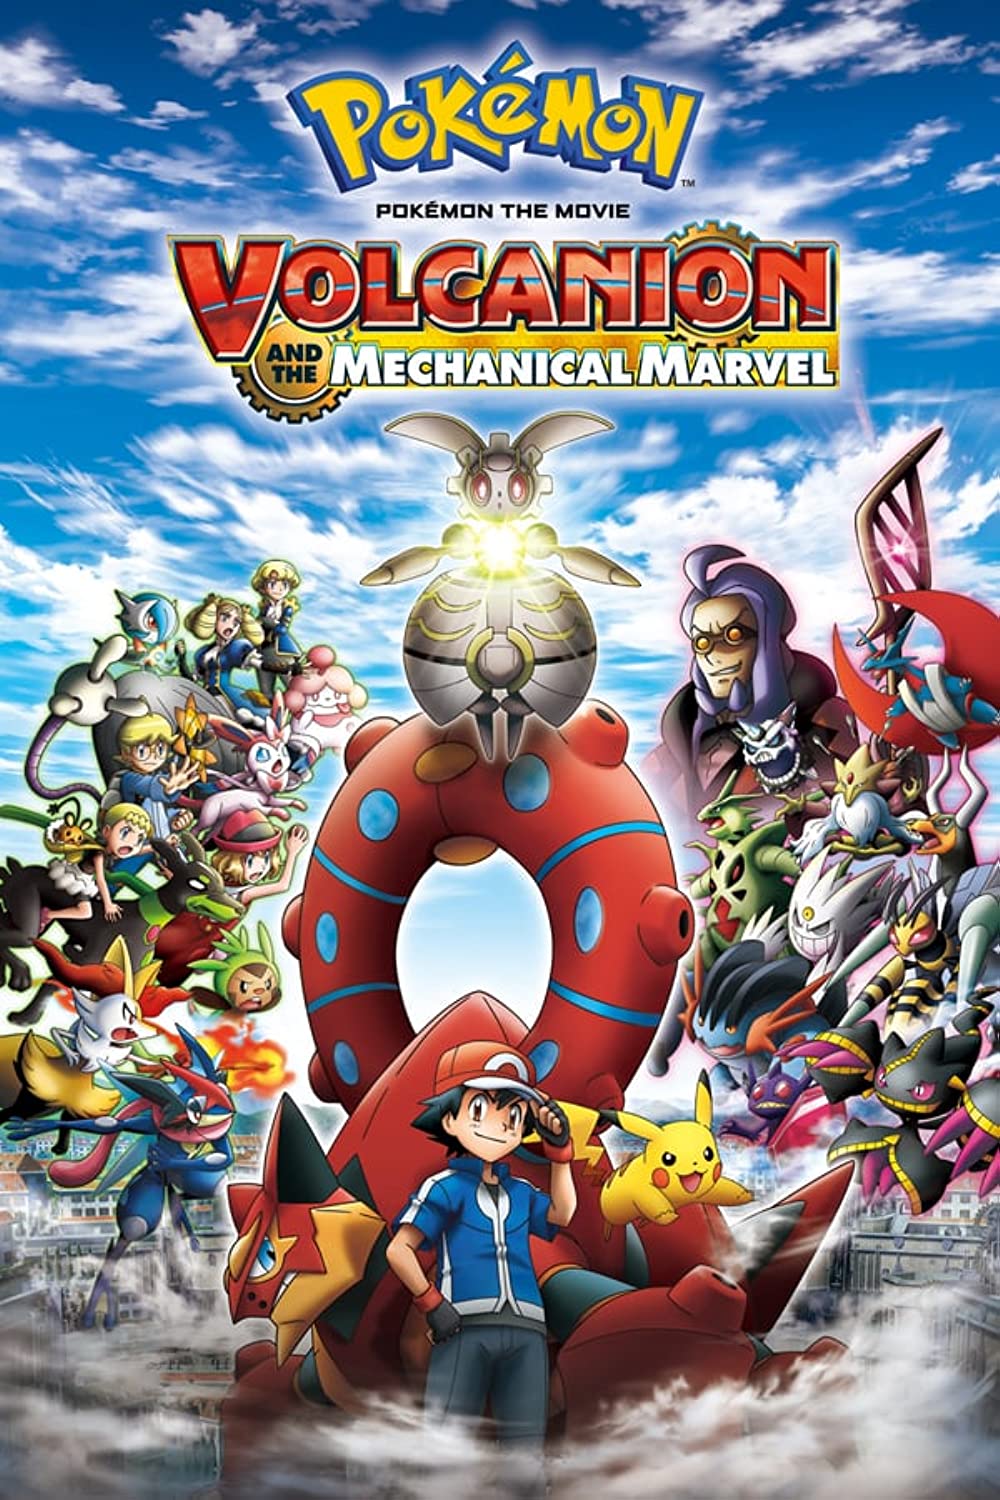 Download Volcanion and the Mechanical Marvel (2016) Dual Audio [Hindi + English] WEB-DL 1080p [1.6GB] | 720p [800MB] | 480p [300MB] download